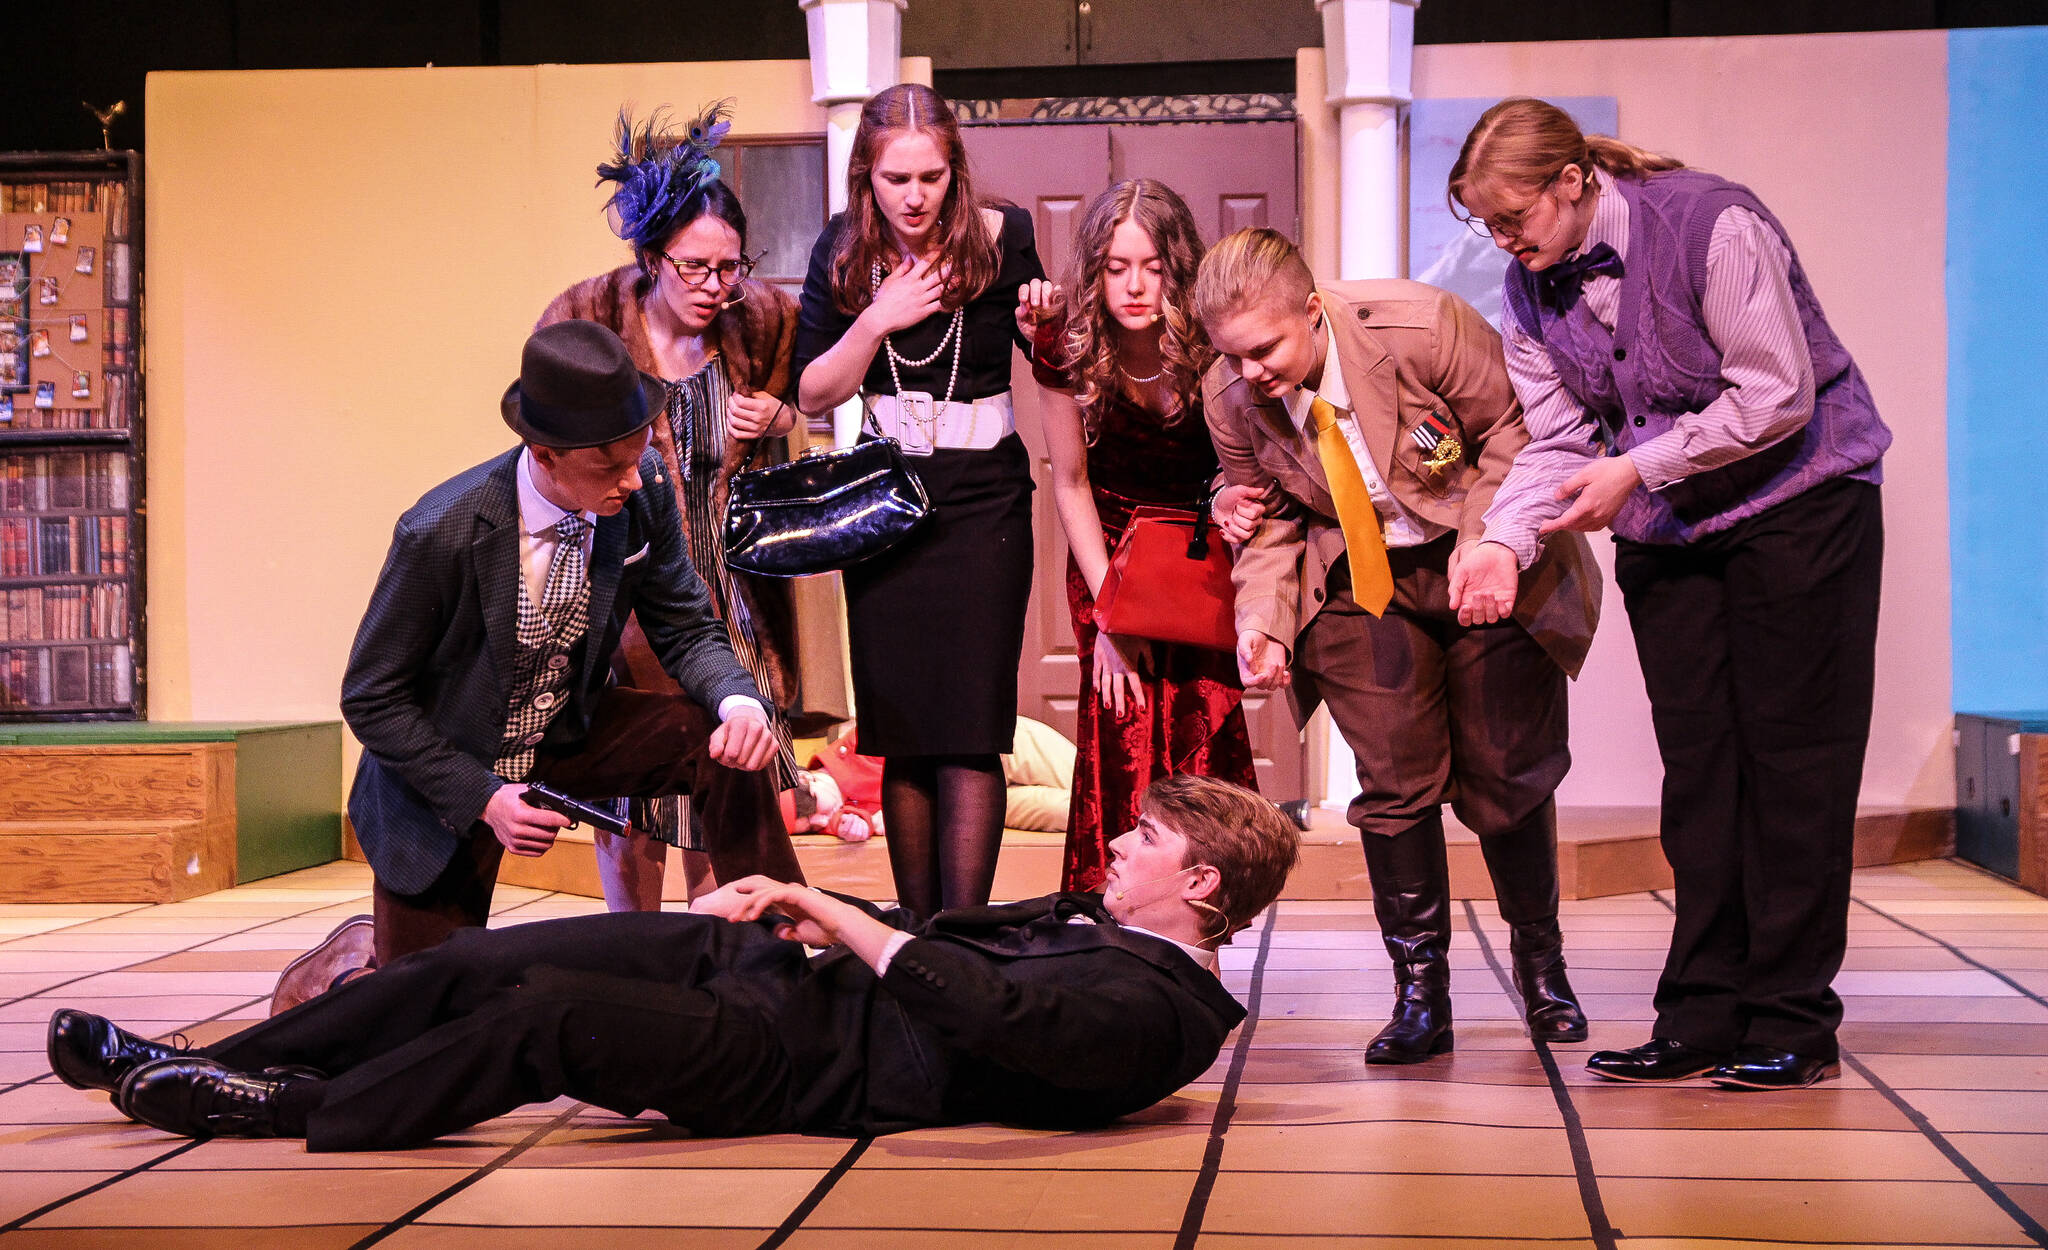 The mansion’s guests watch as Wadsworth (Spencer Grubbs) reacts dramatically to his injuries. (Photo by Luisa Loi)